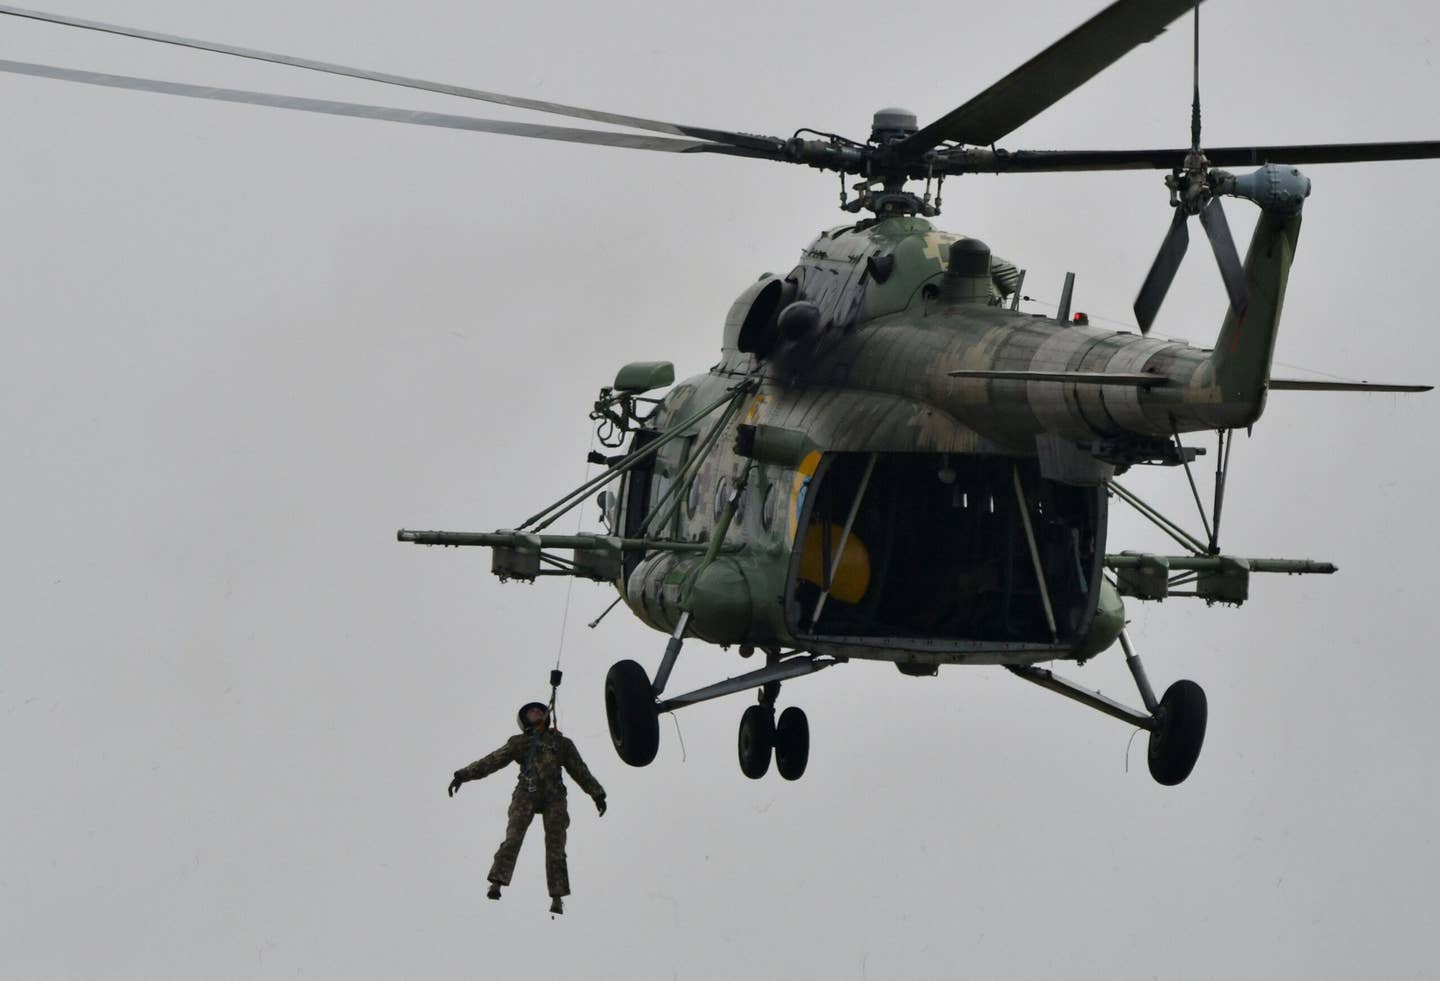 Two Ukrainian Mi-8 Hip helicopters, like this one seen at a 2018 demonstration event, lifted off from Dnipro airfield on the first of several missions to resupply the Azovstal defenders. (GENYA SAVILOV/AFP via Getty Images)